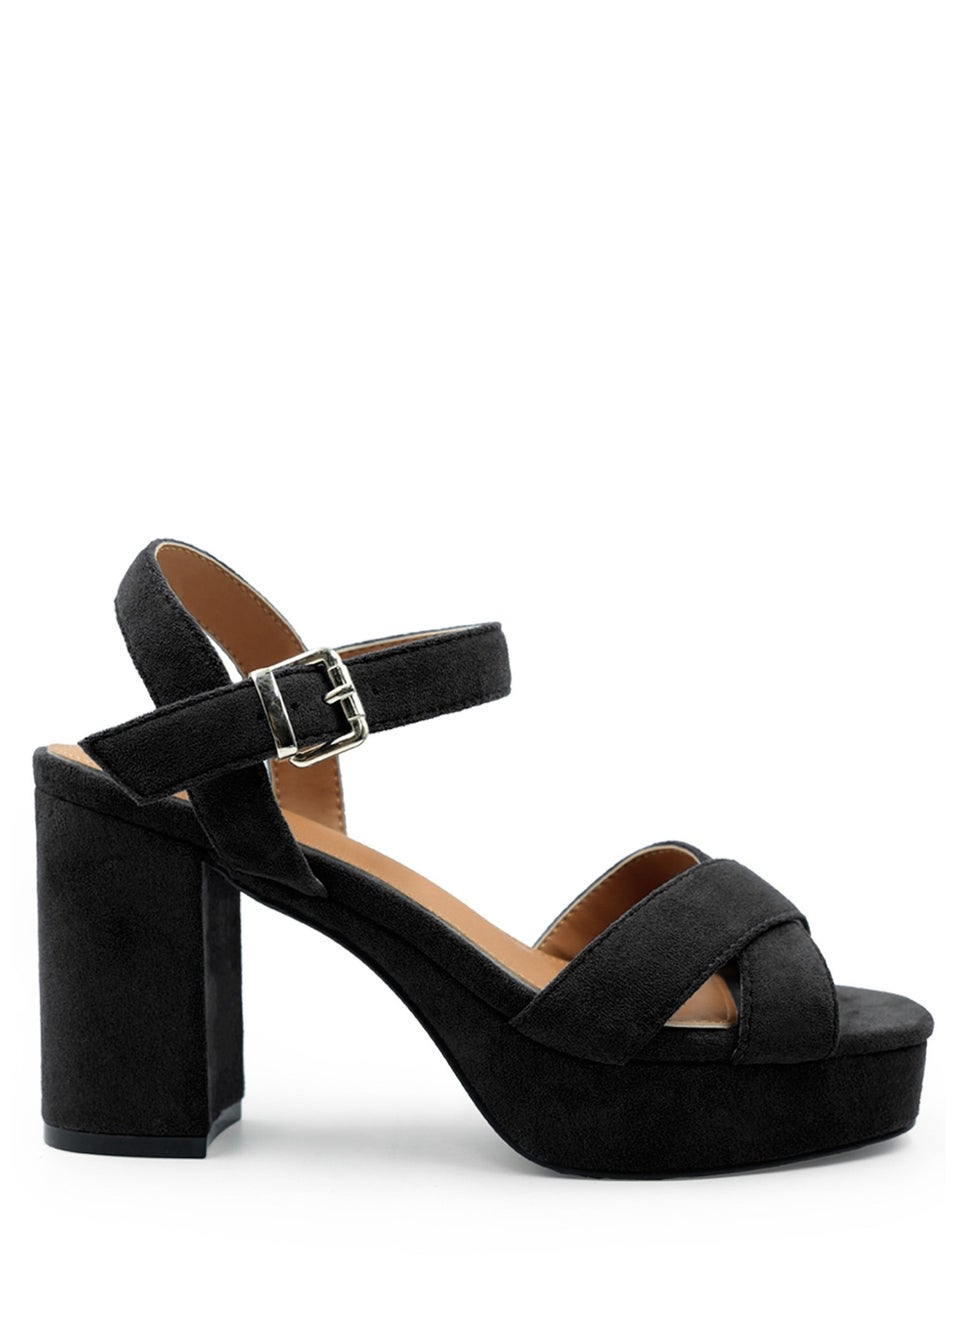 Where's That From Black Suede Marcia Platform Strappy Block Heels